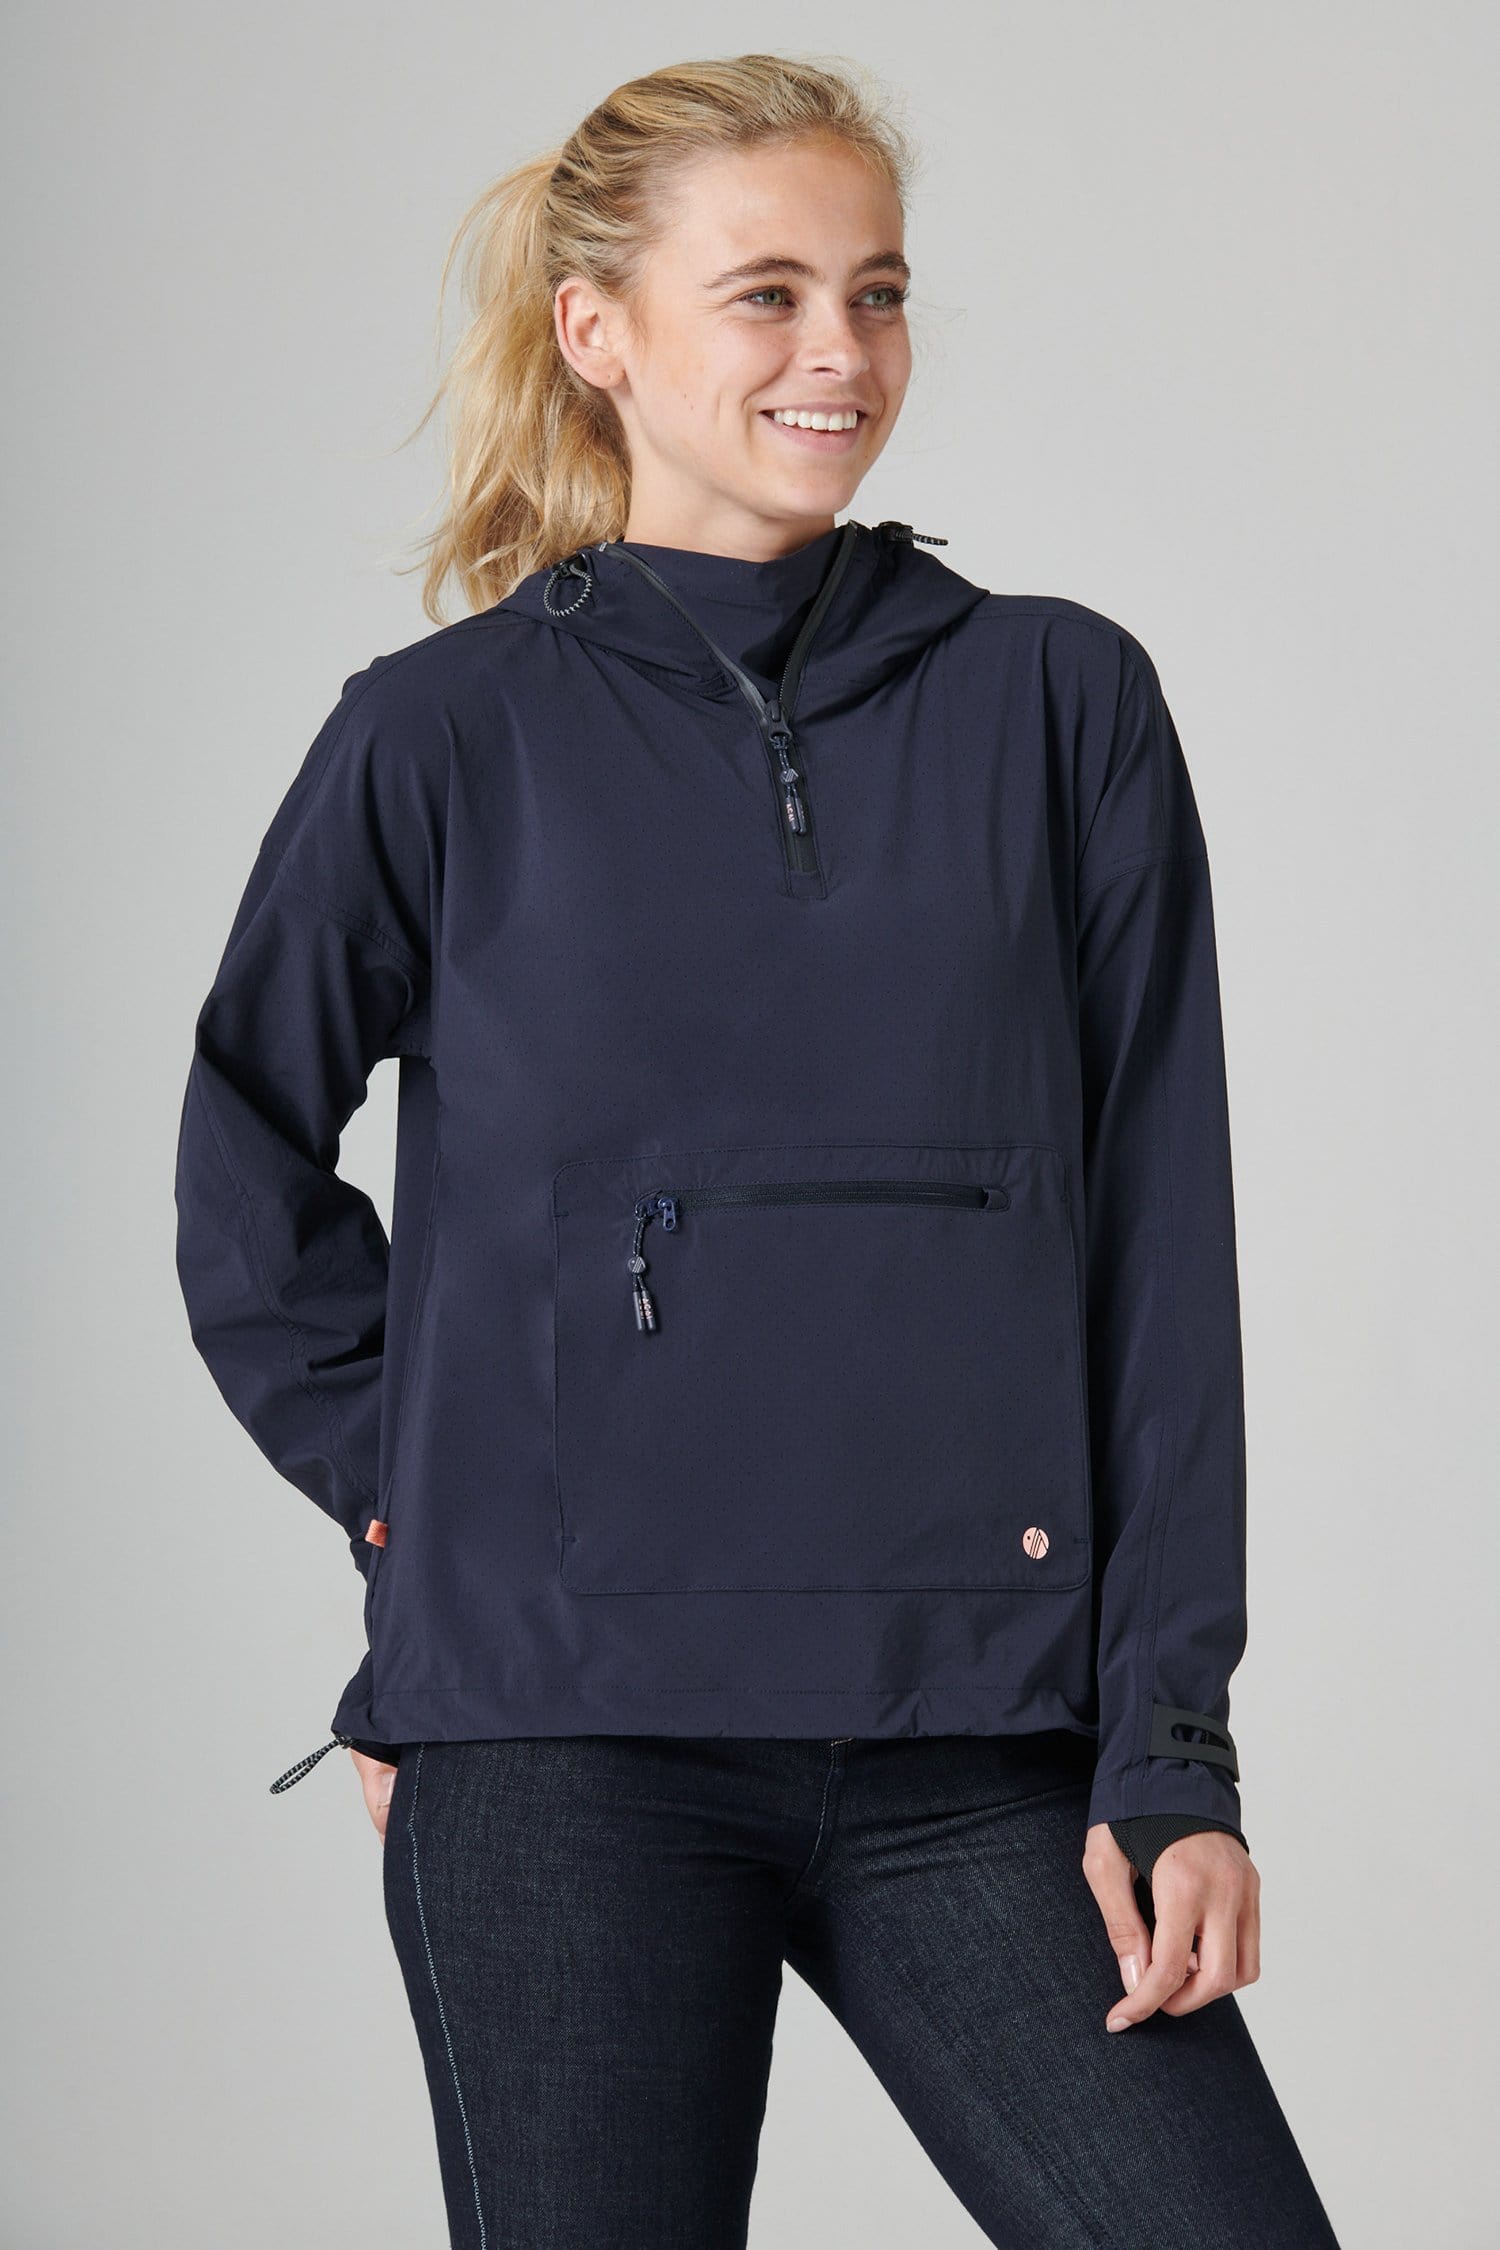 The Outdoor Showerproof Popover - Midnight Blue - Large - Womens - Acai Outdoorwear